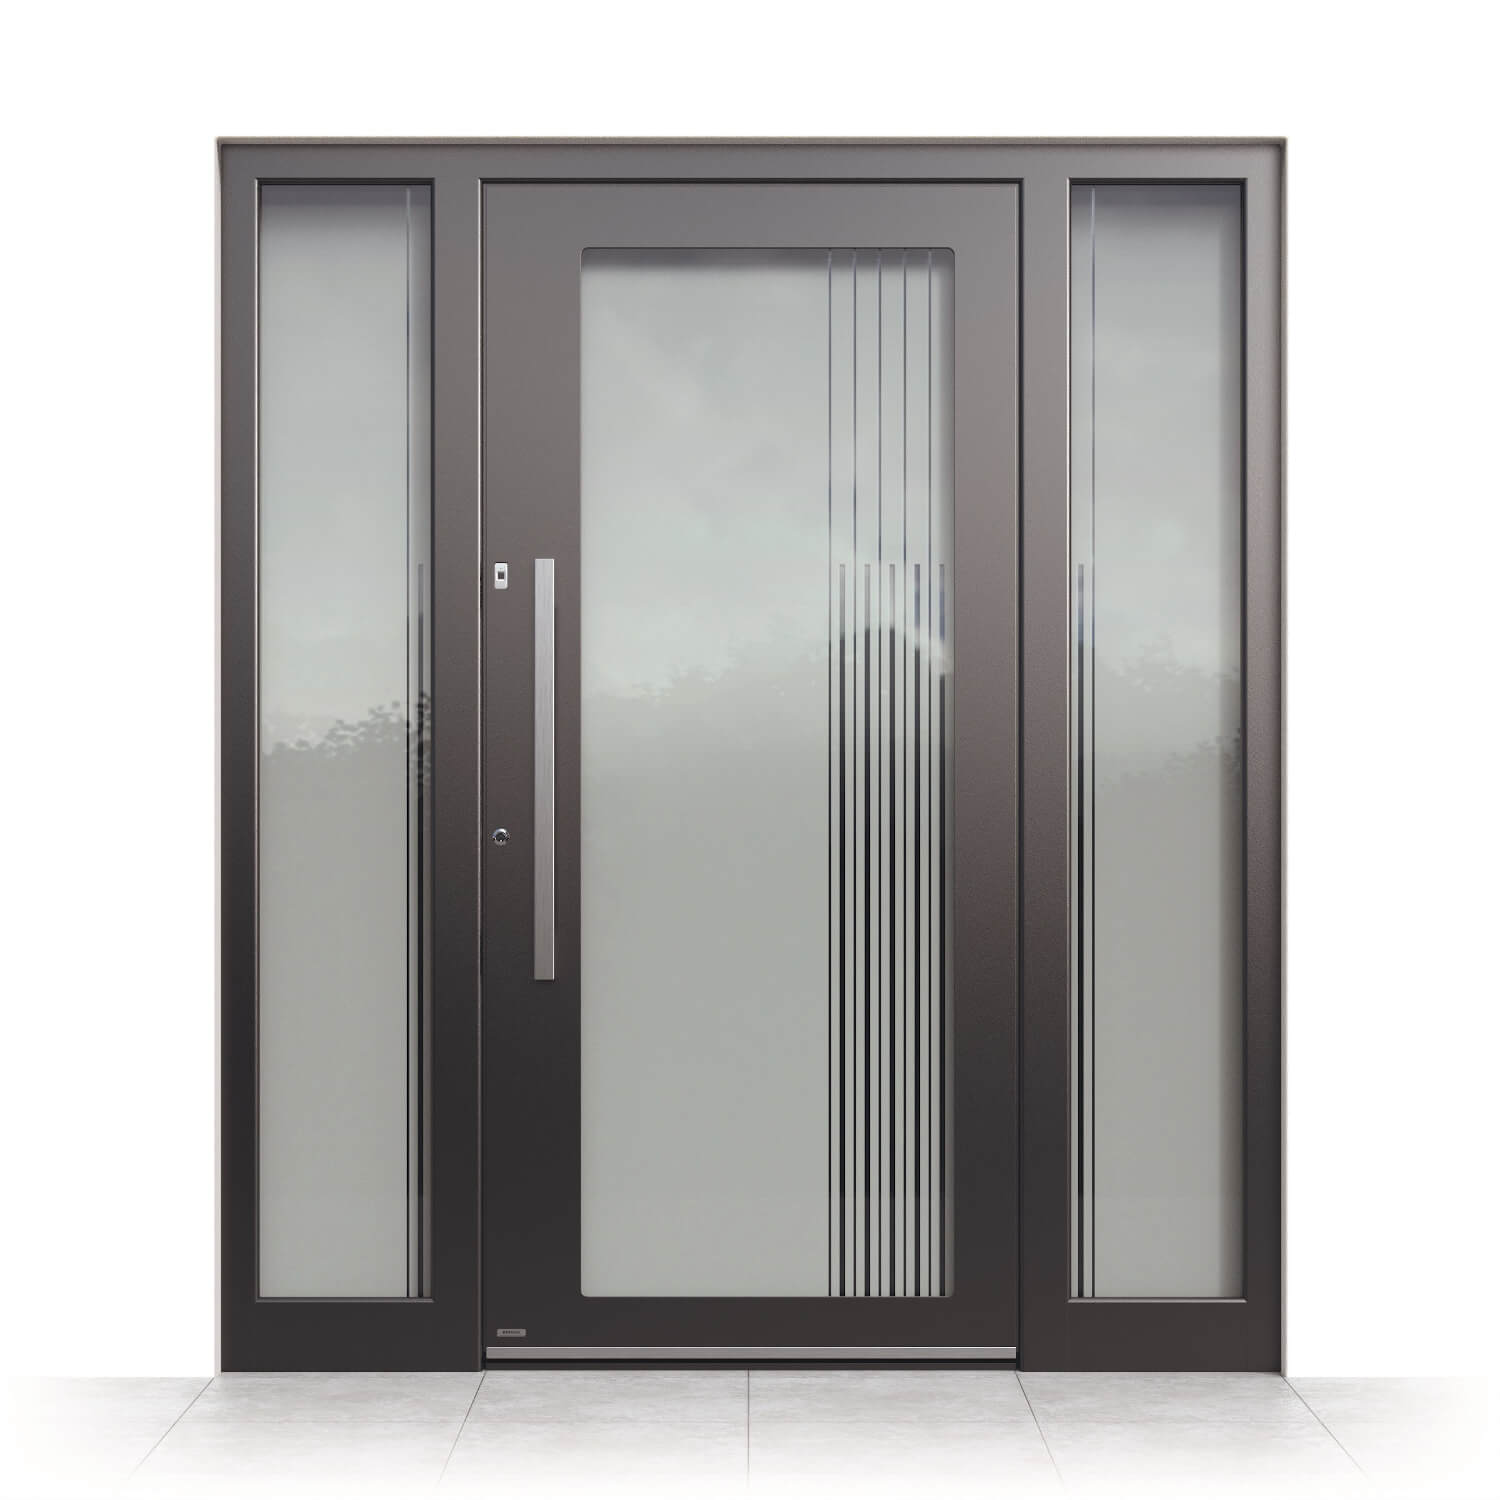 Nanaimo model front door with side panels